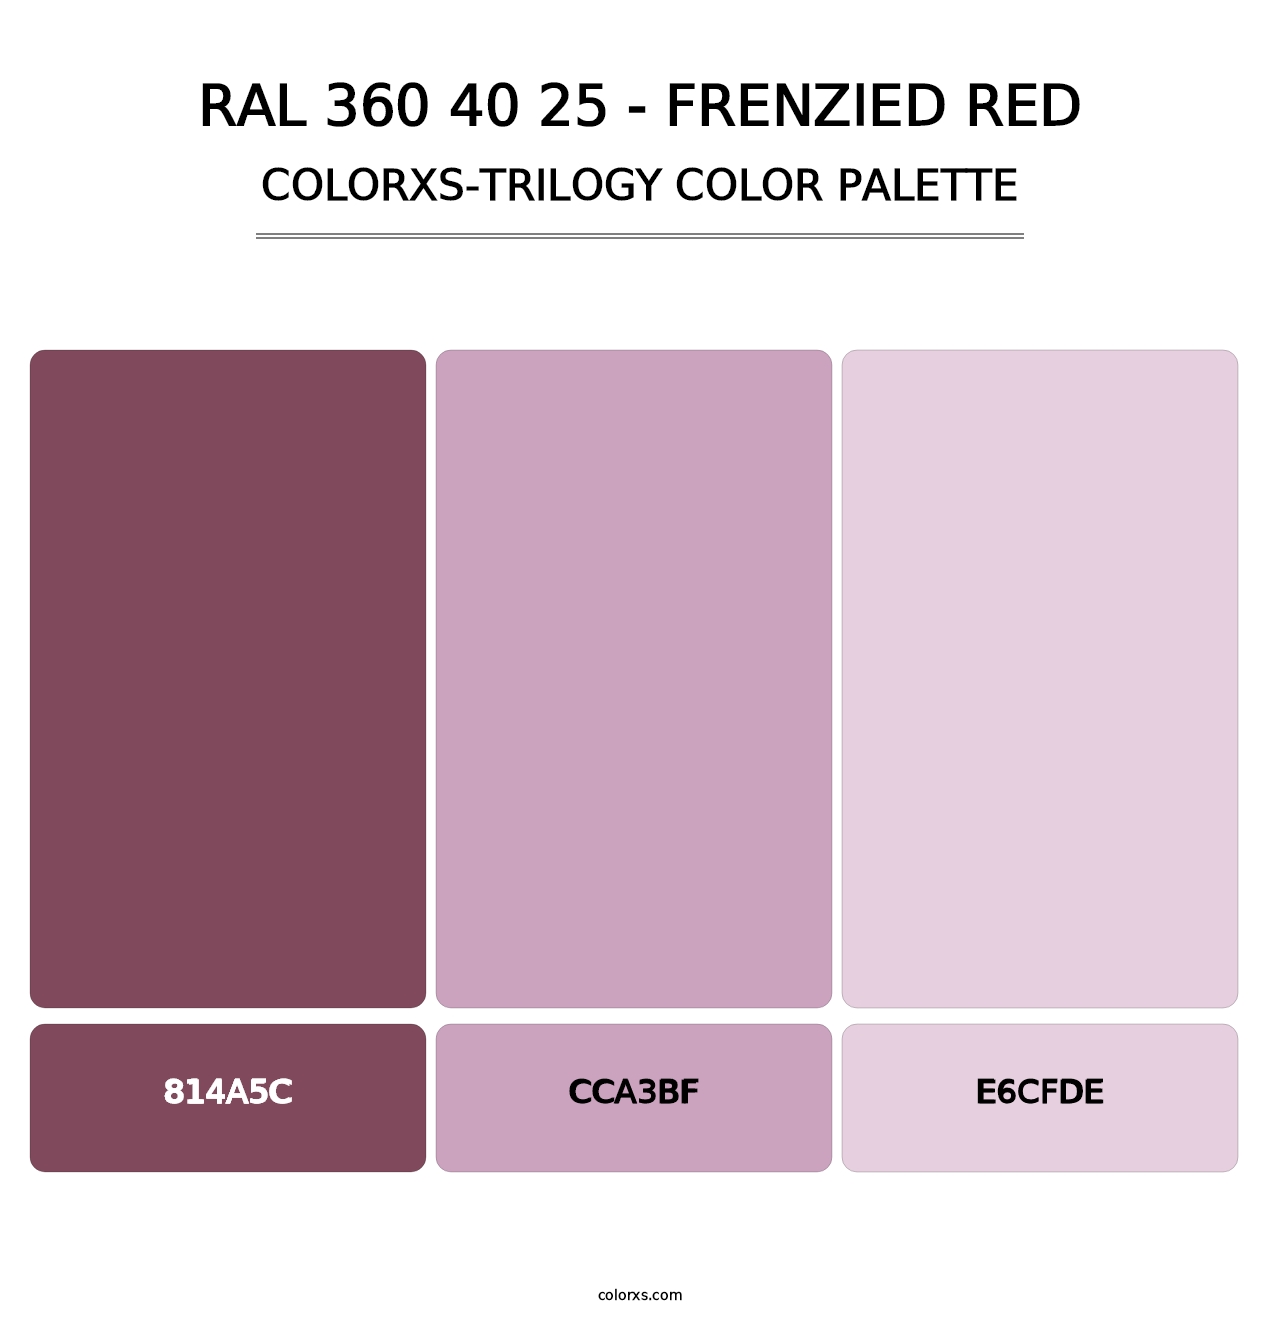 RAL 360 40 25 - Frenzied Red - Colorxs Trilogy Palette